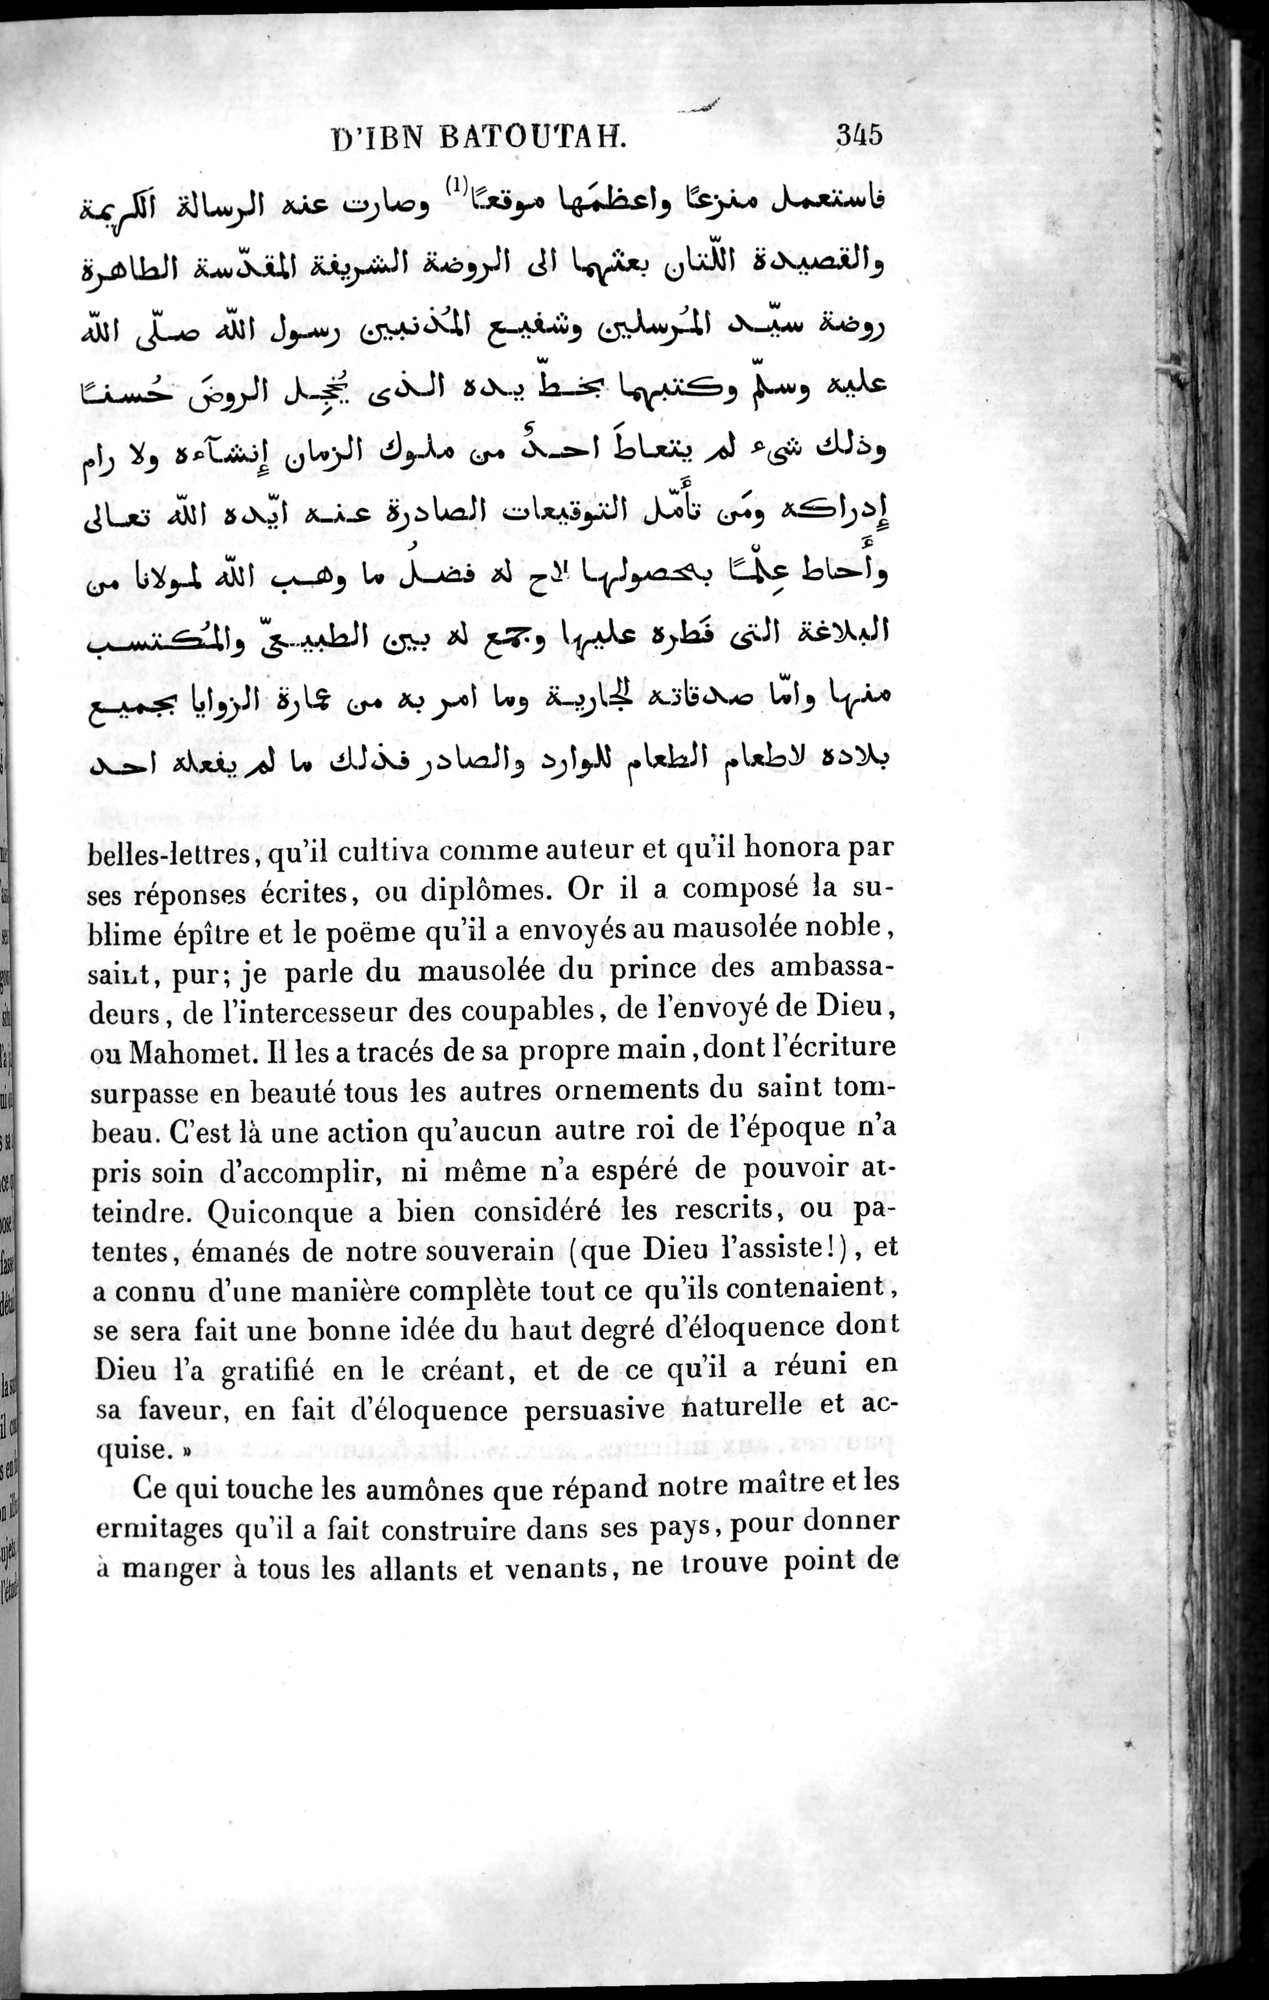 Voyages d'Ibn Batoutah : vol.4 / Page 357 (Grayscale High Resolution Image)